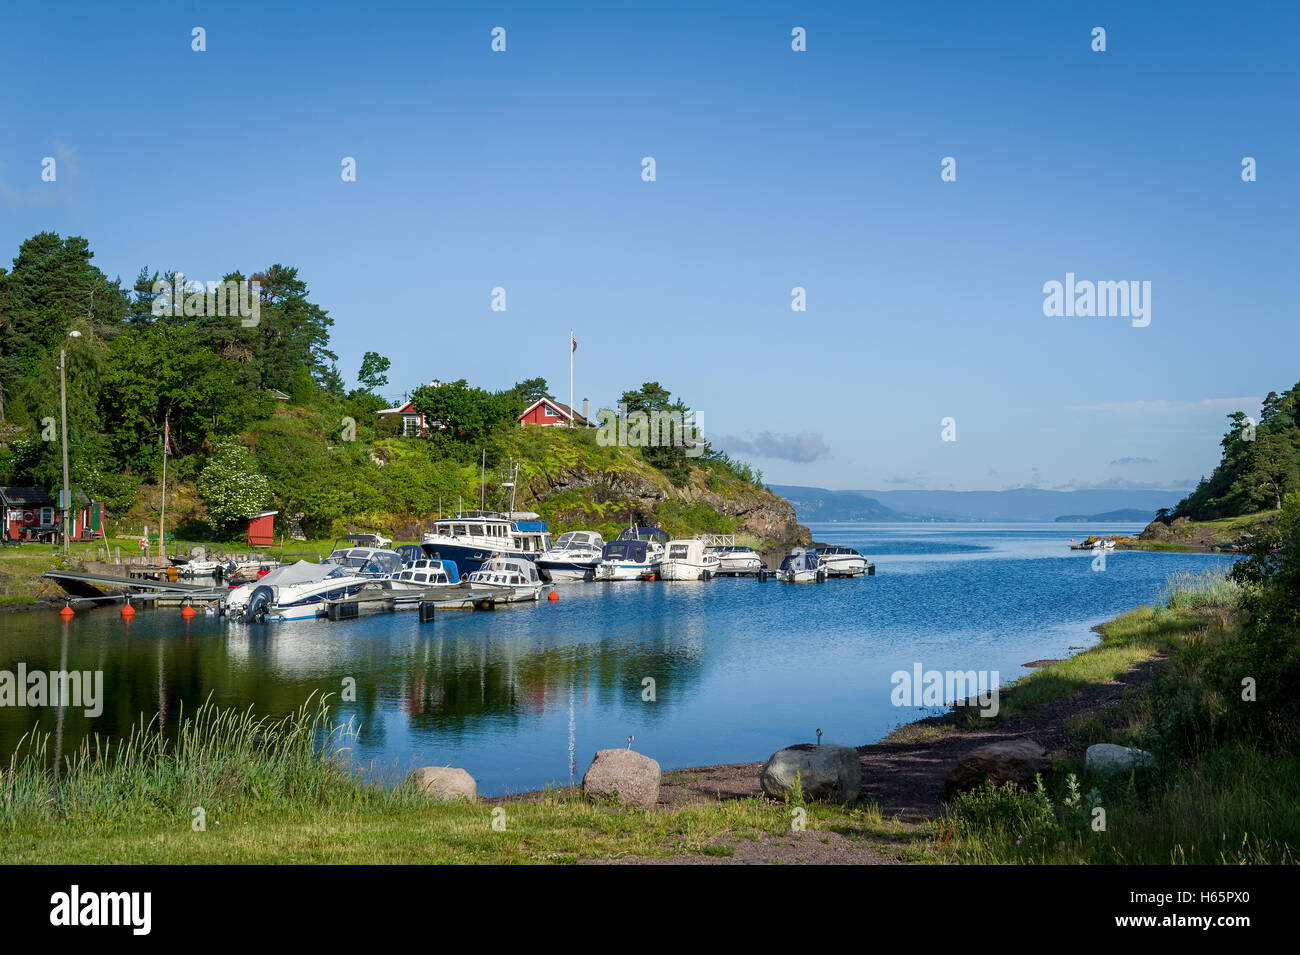 Typical nordic bay with recreational boats moored Stock Photo